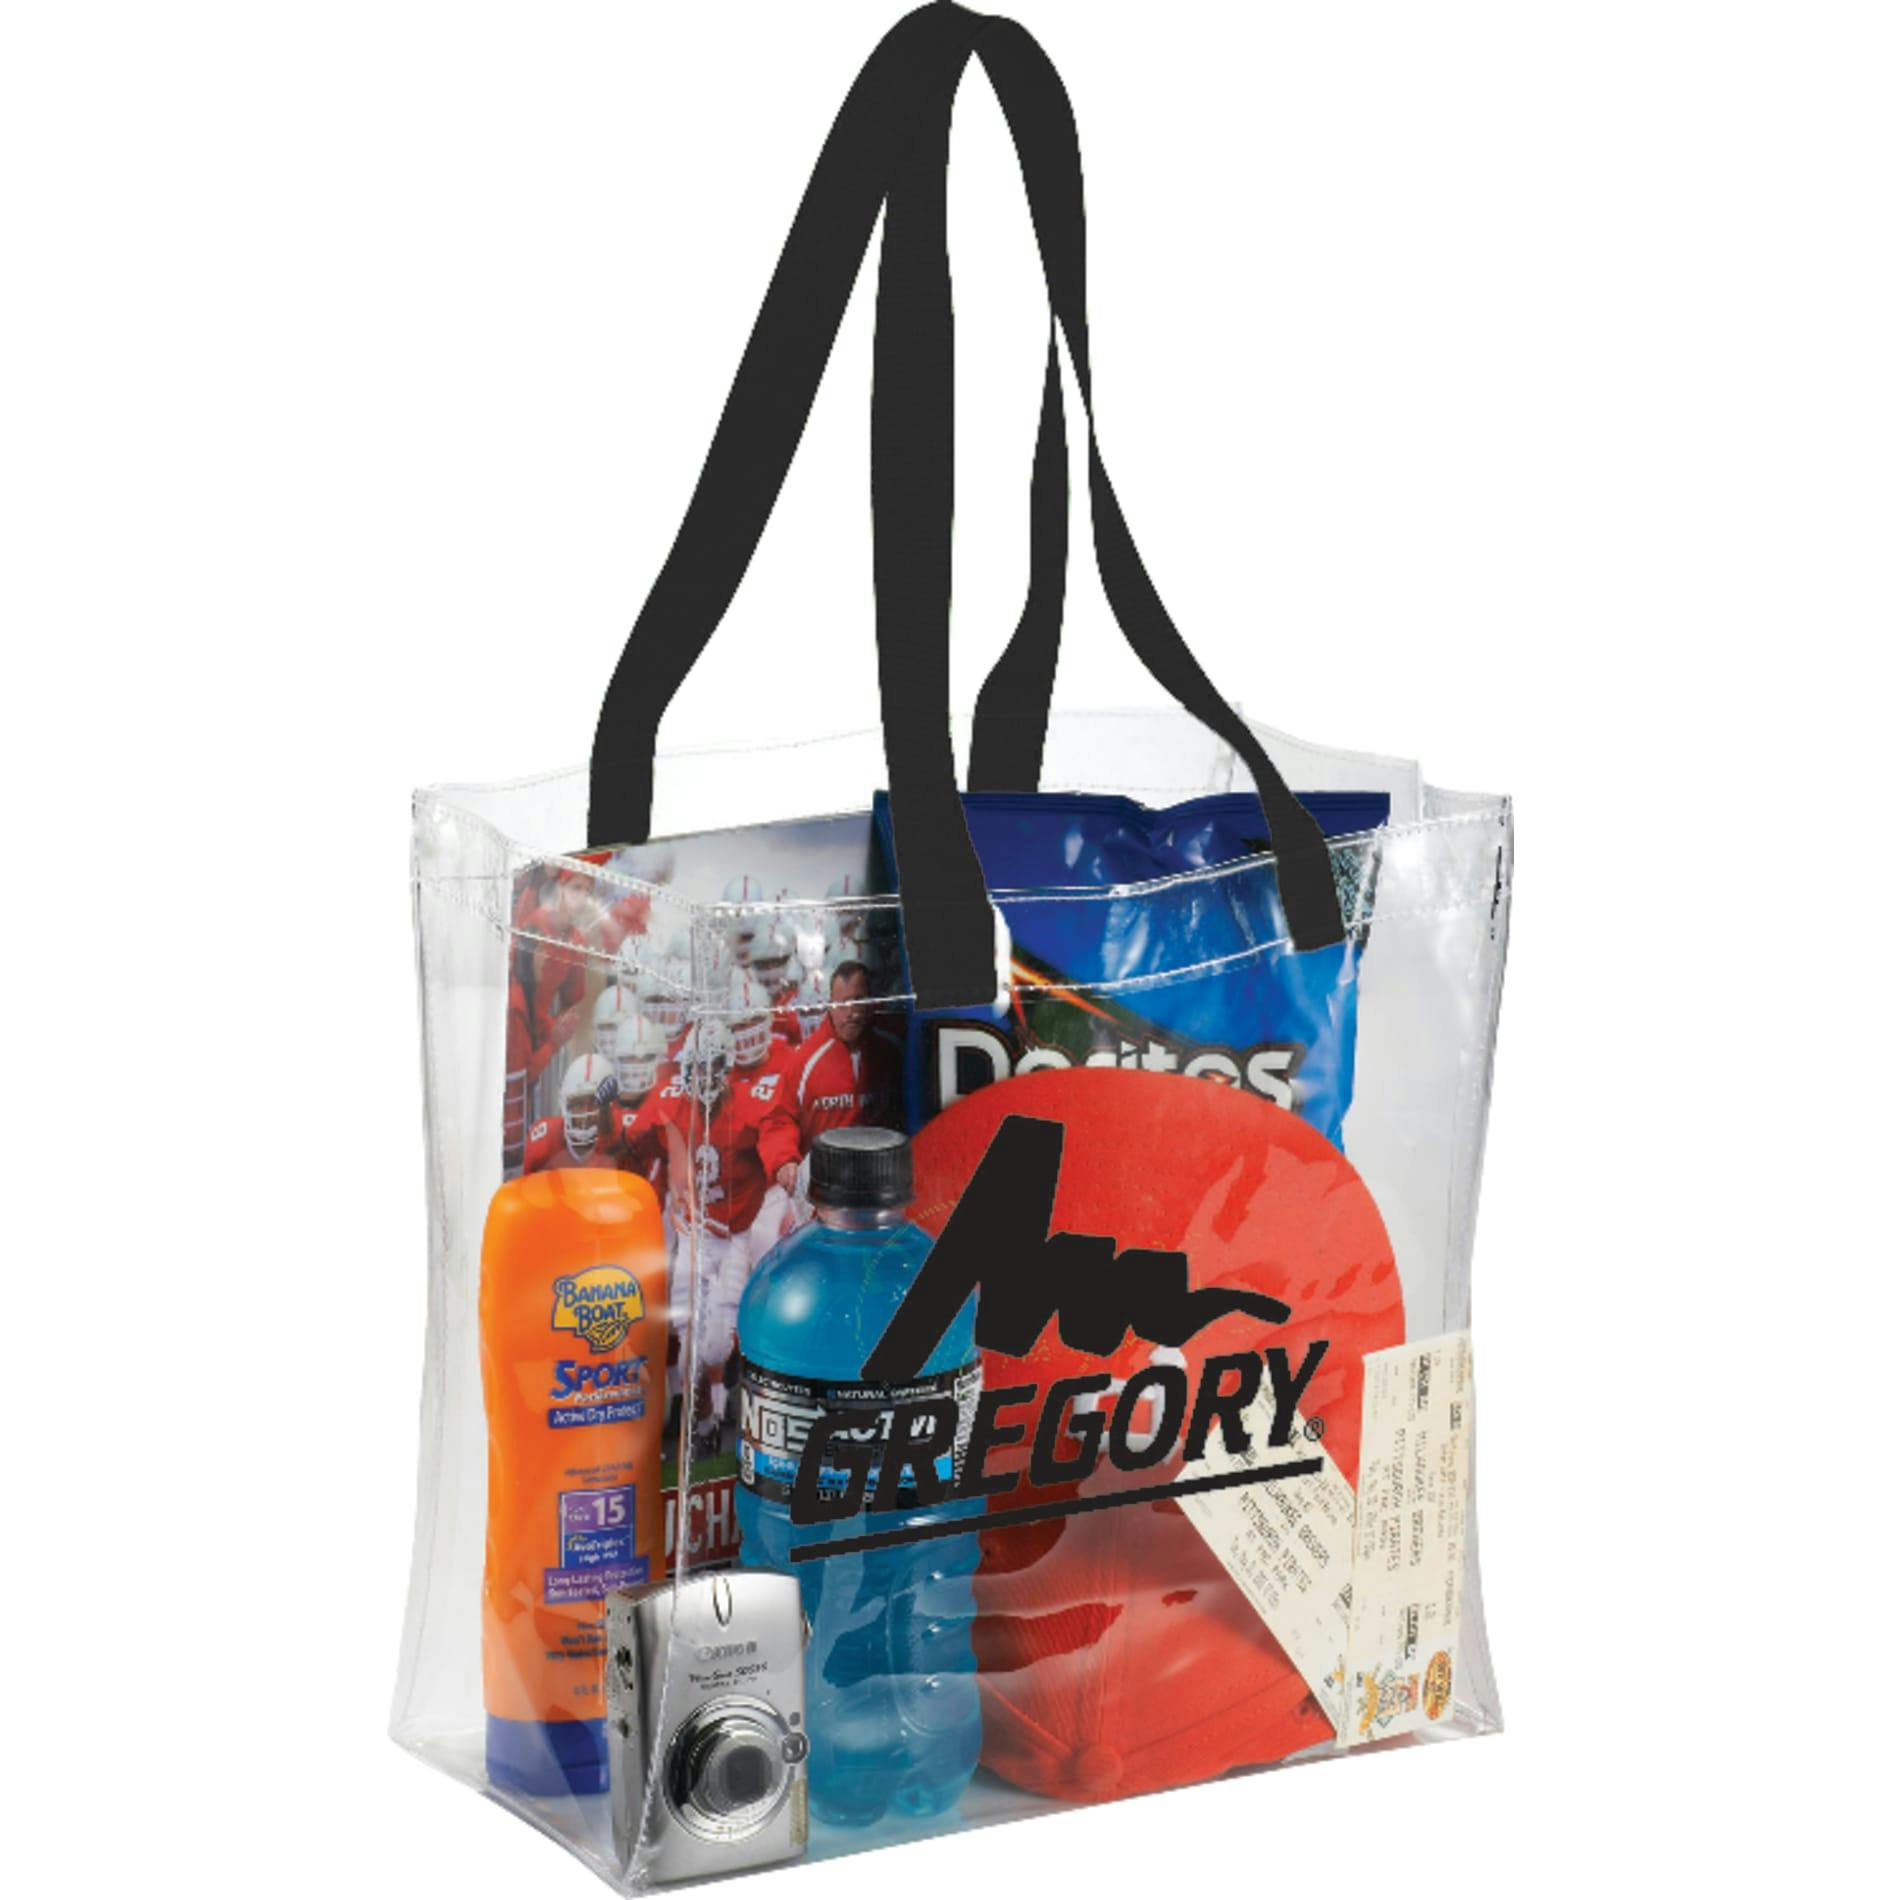 Rally Clear Stadium Tote - additional Image 1